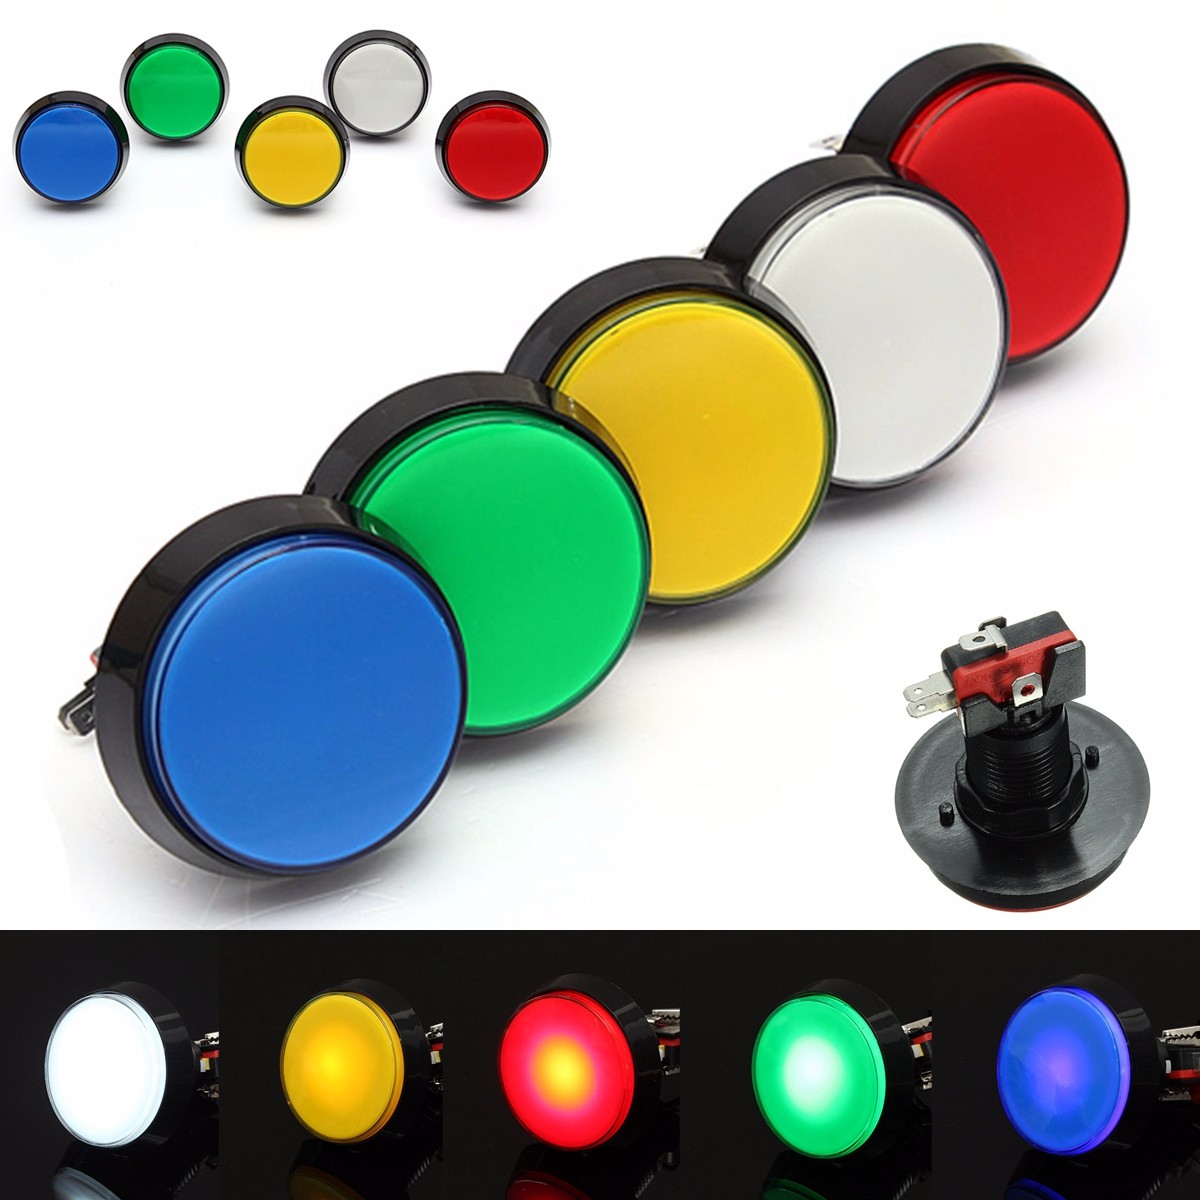 Arcade Button LED Light Lamp 60MM Big Round Arcade Video Game Player Push Switch 